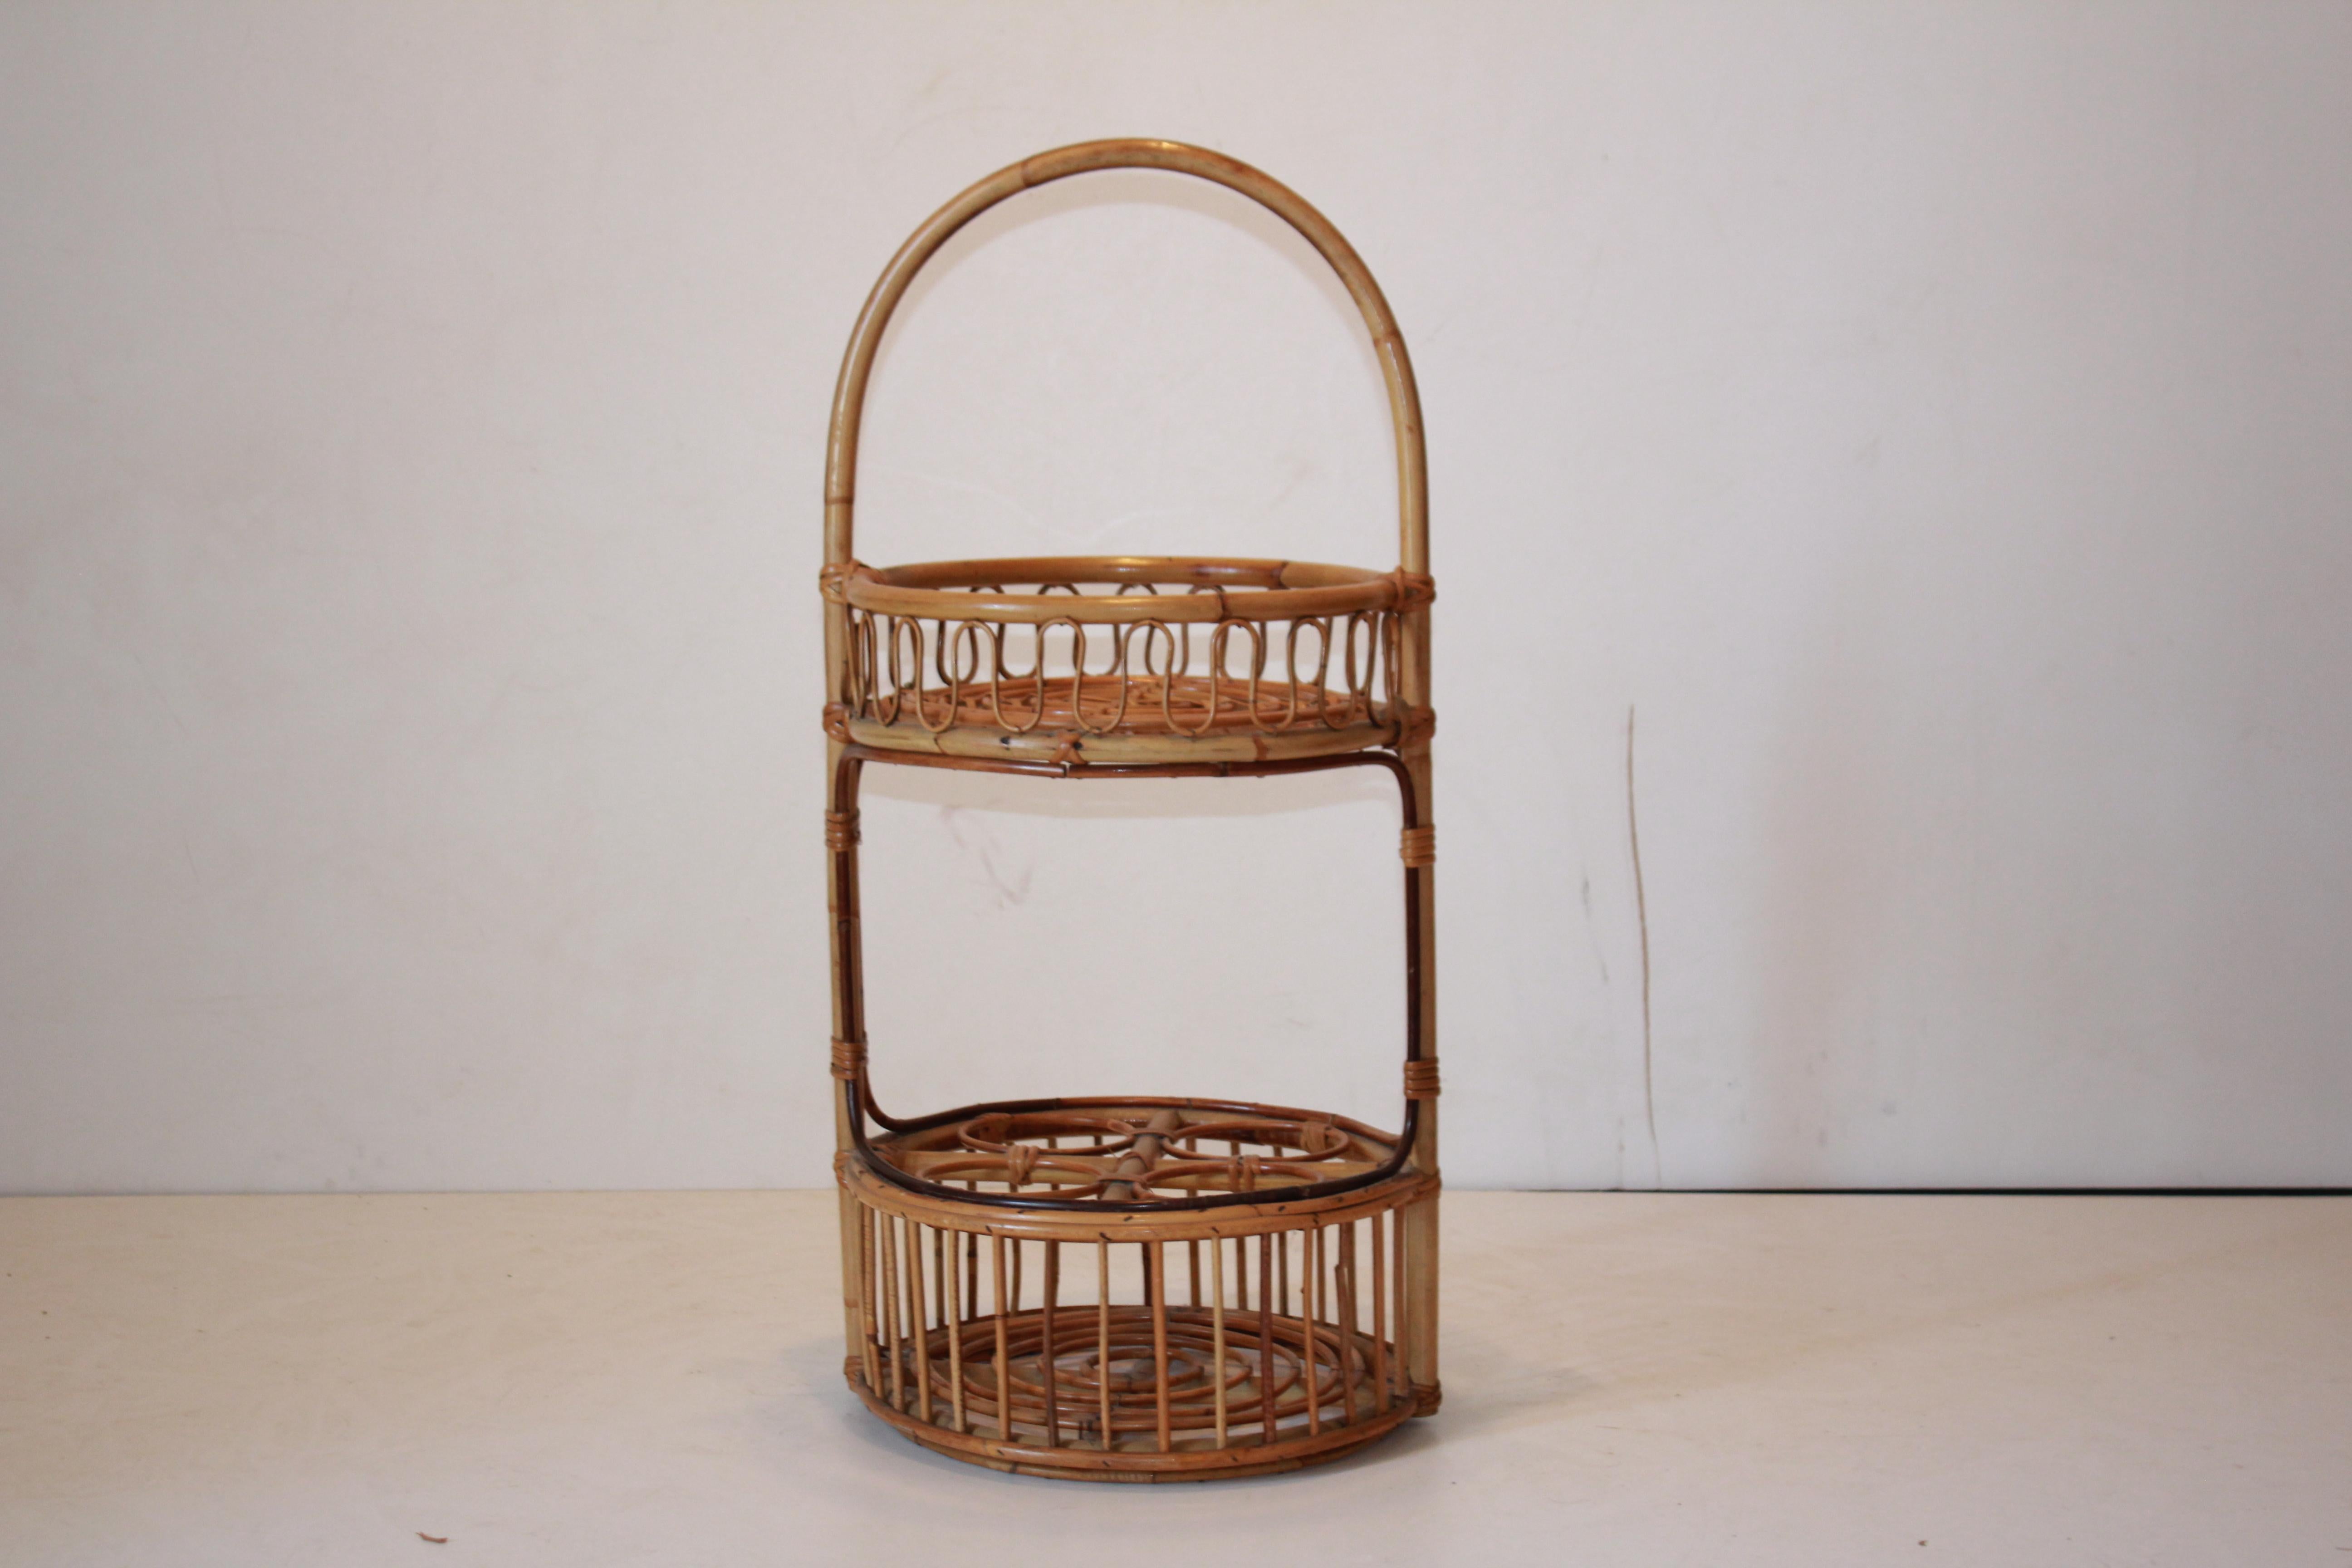 A cosy vintage bamboo drink cocktail side cart produced in Italy in the 1960's.
Circular shape with a confortable curved bamboo handler on the top. Two shelves with the inferior one having four bottles case. In really good conditions with only few